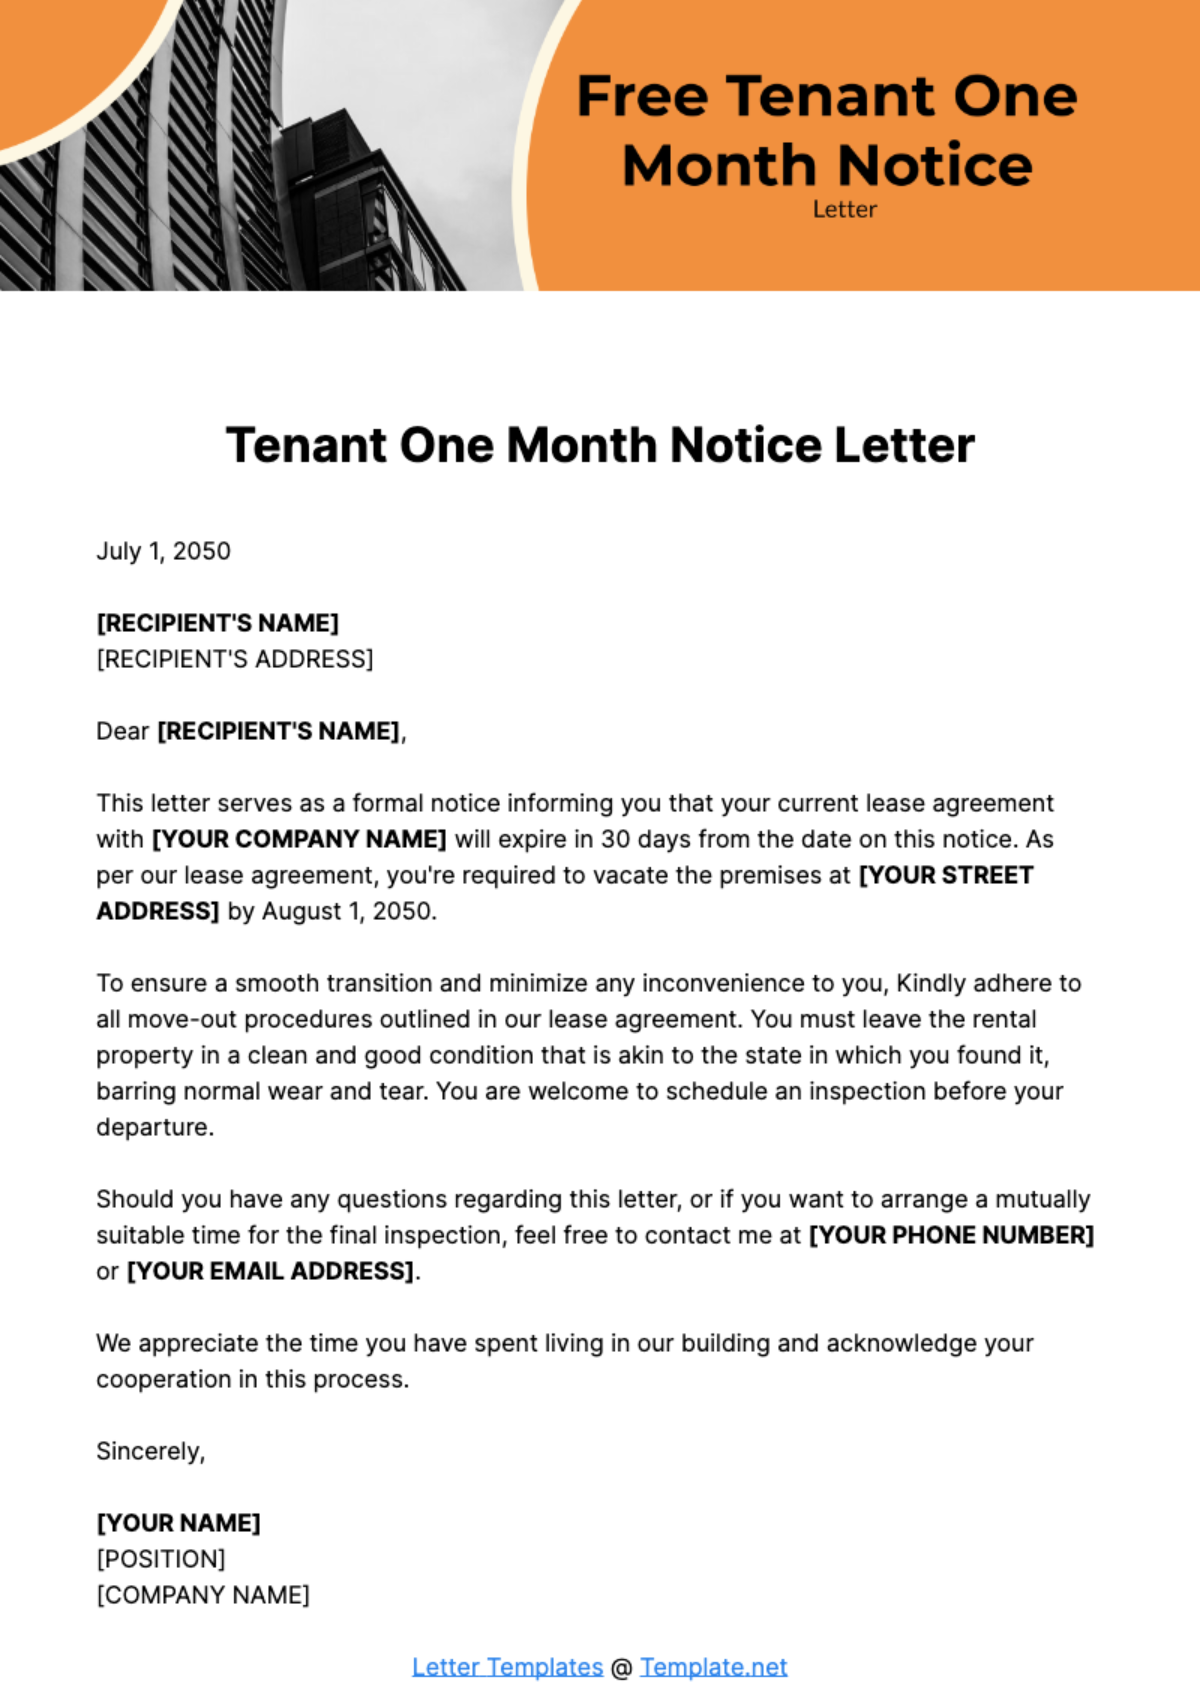 Free Tenant One Month Notice Letter Template